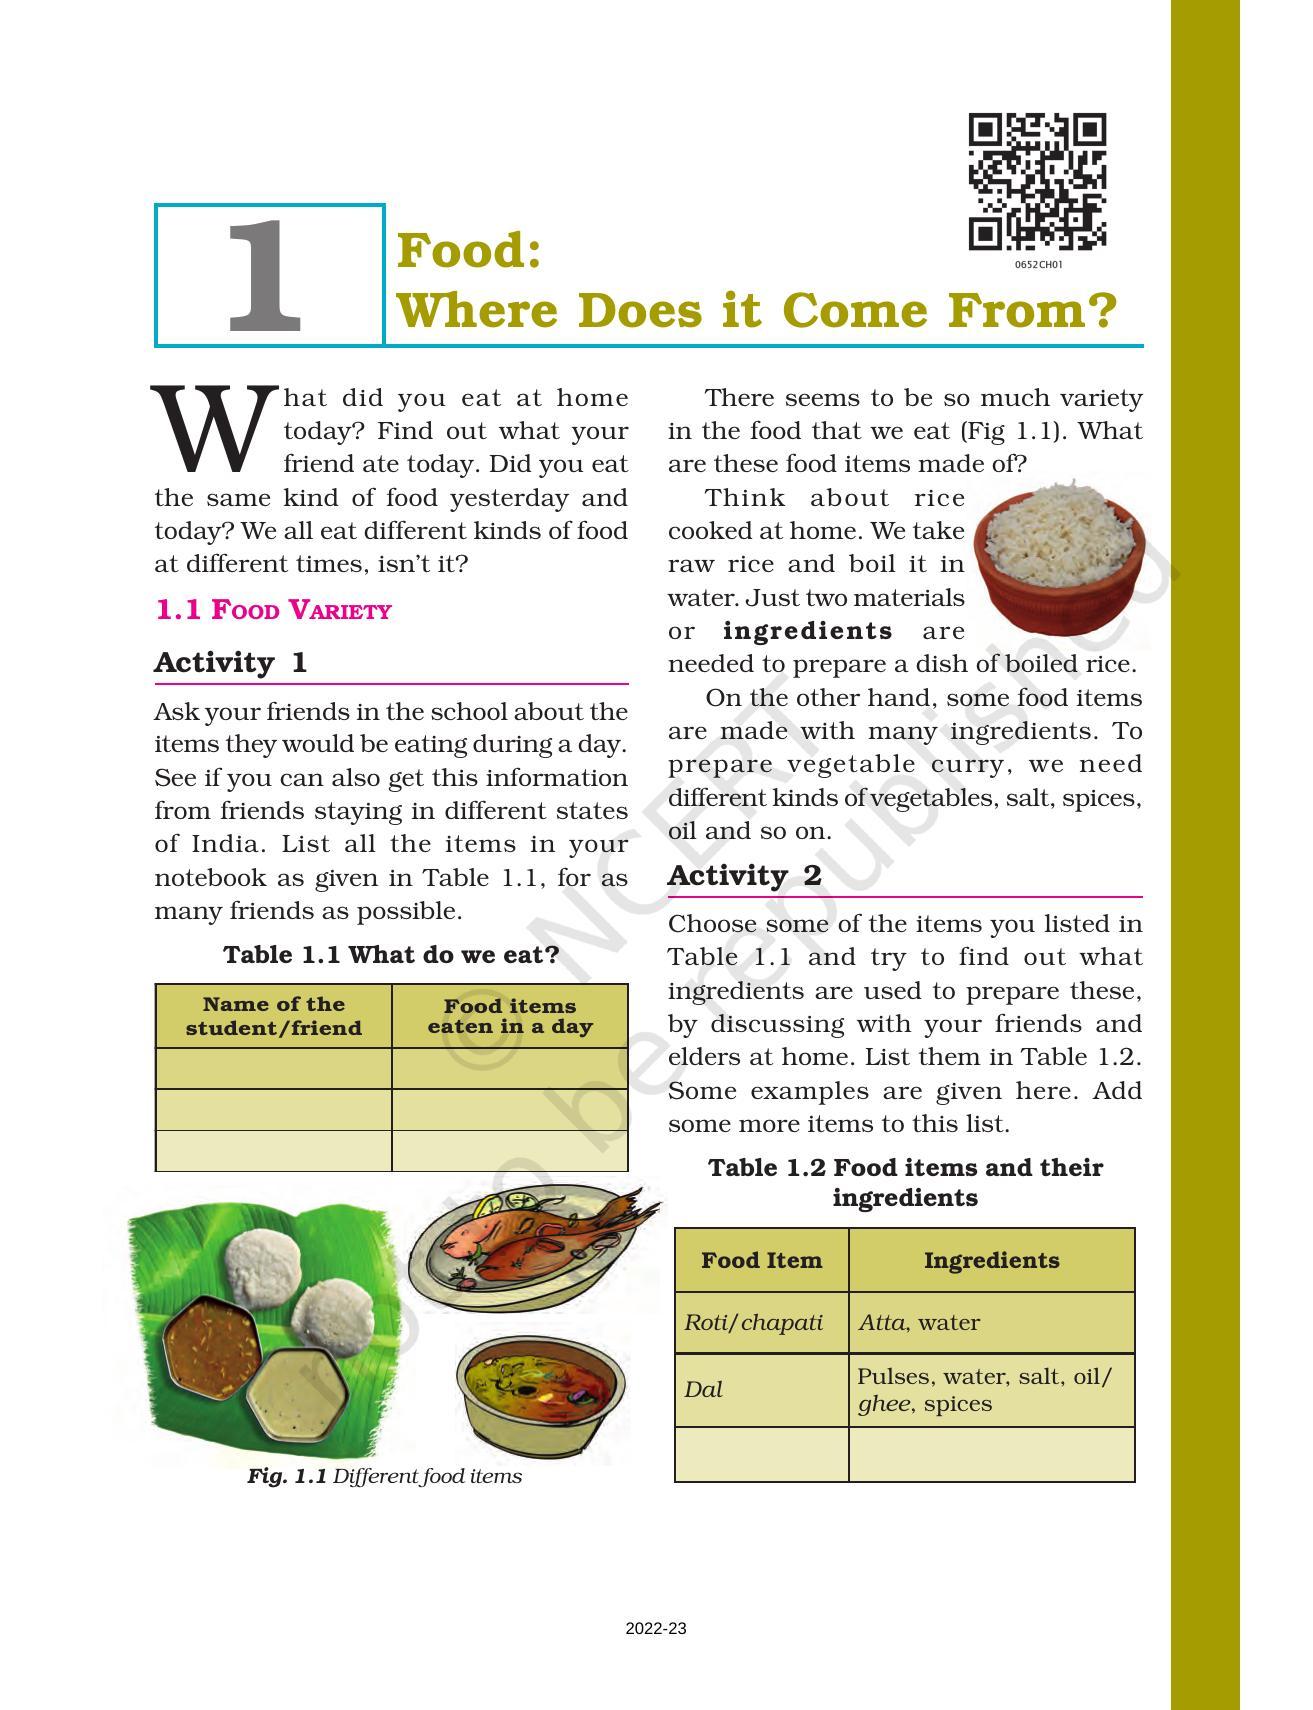 NCERT Book for Class 6 Science: Chapter 1-Food, Where Does It Come From? - Page 1